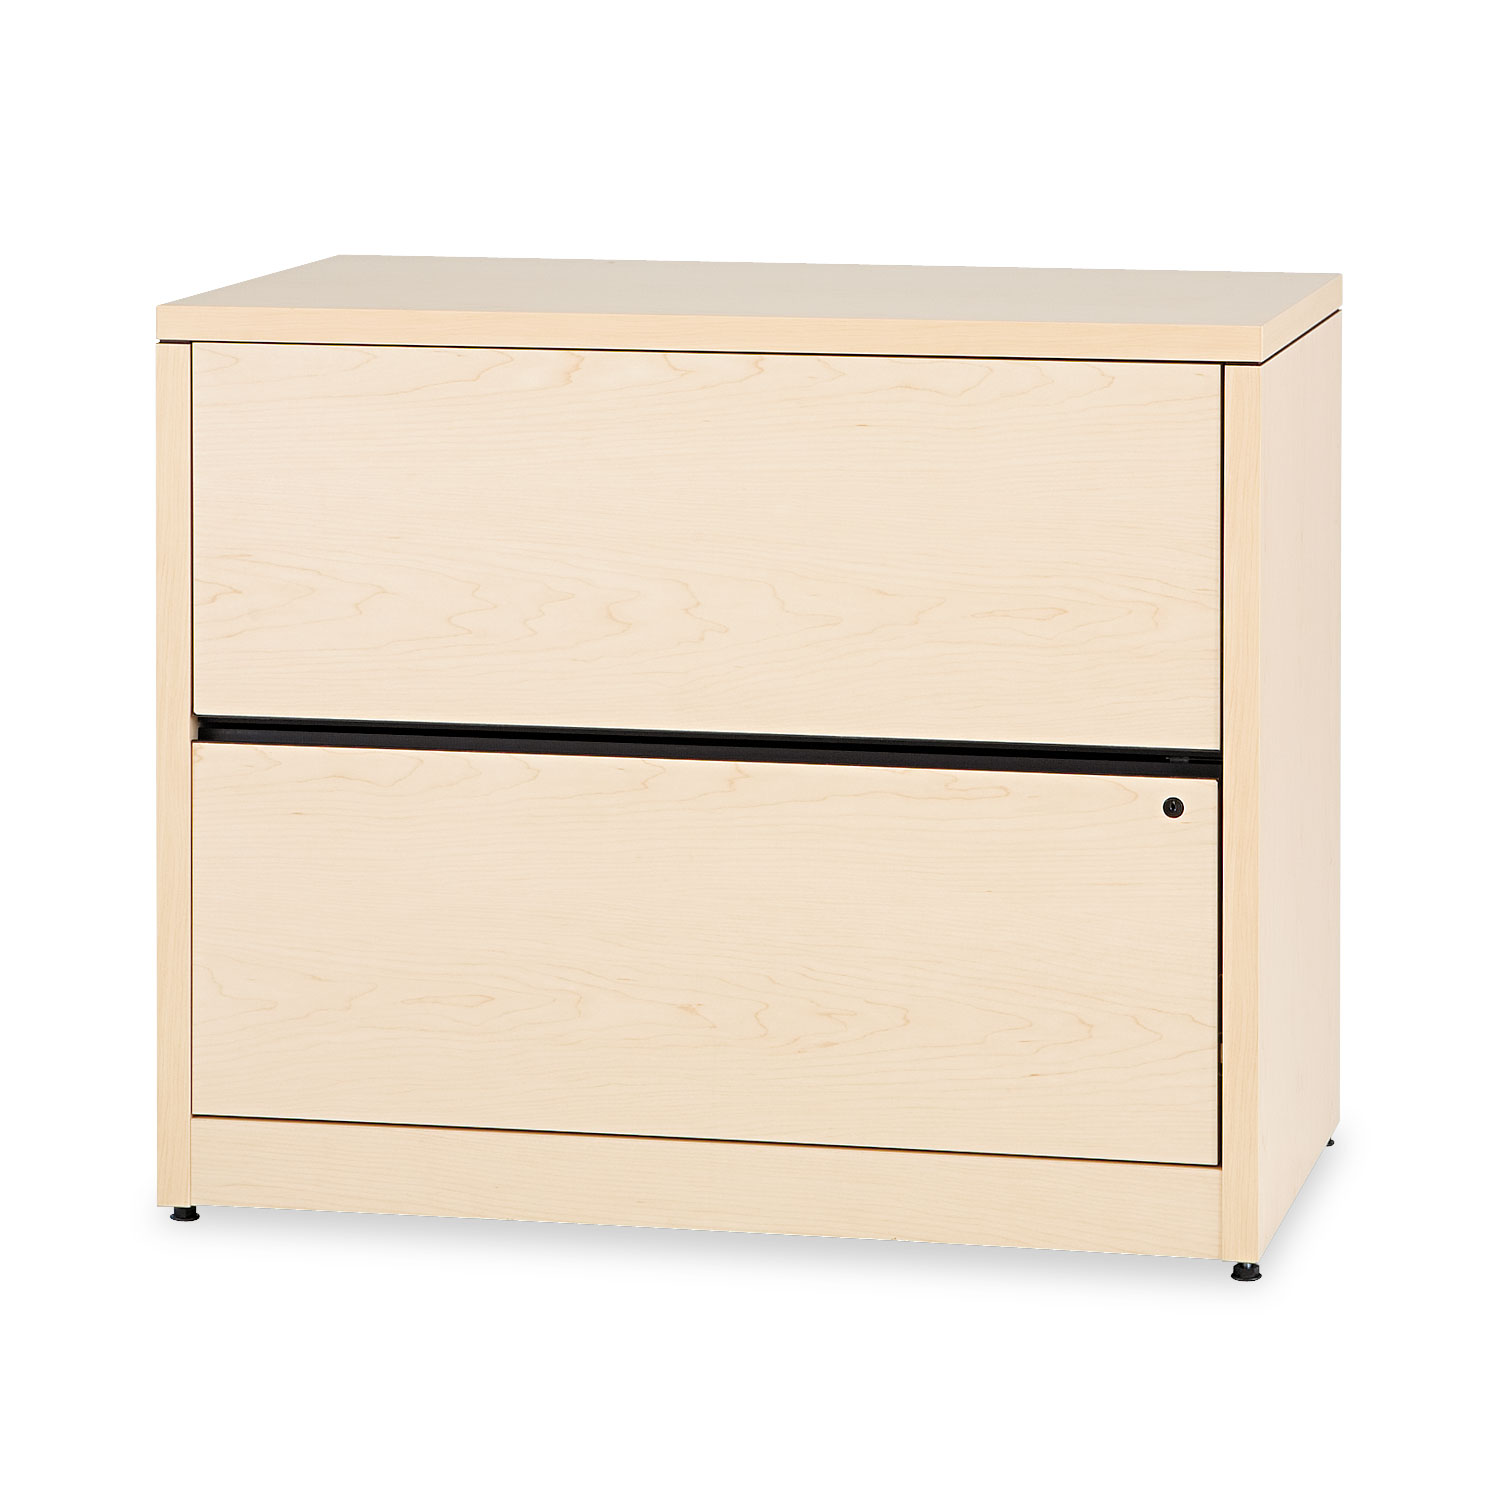 10500 Series Two-Drawer Lateral File, 36w x 20d x 29-1/2h, Natural Maple